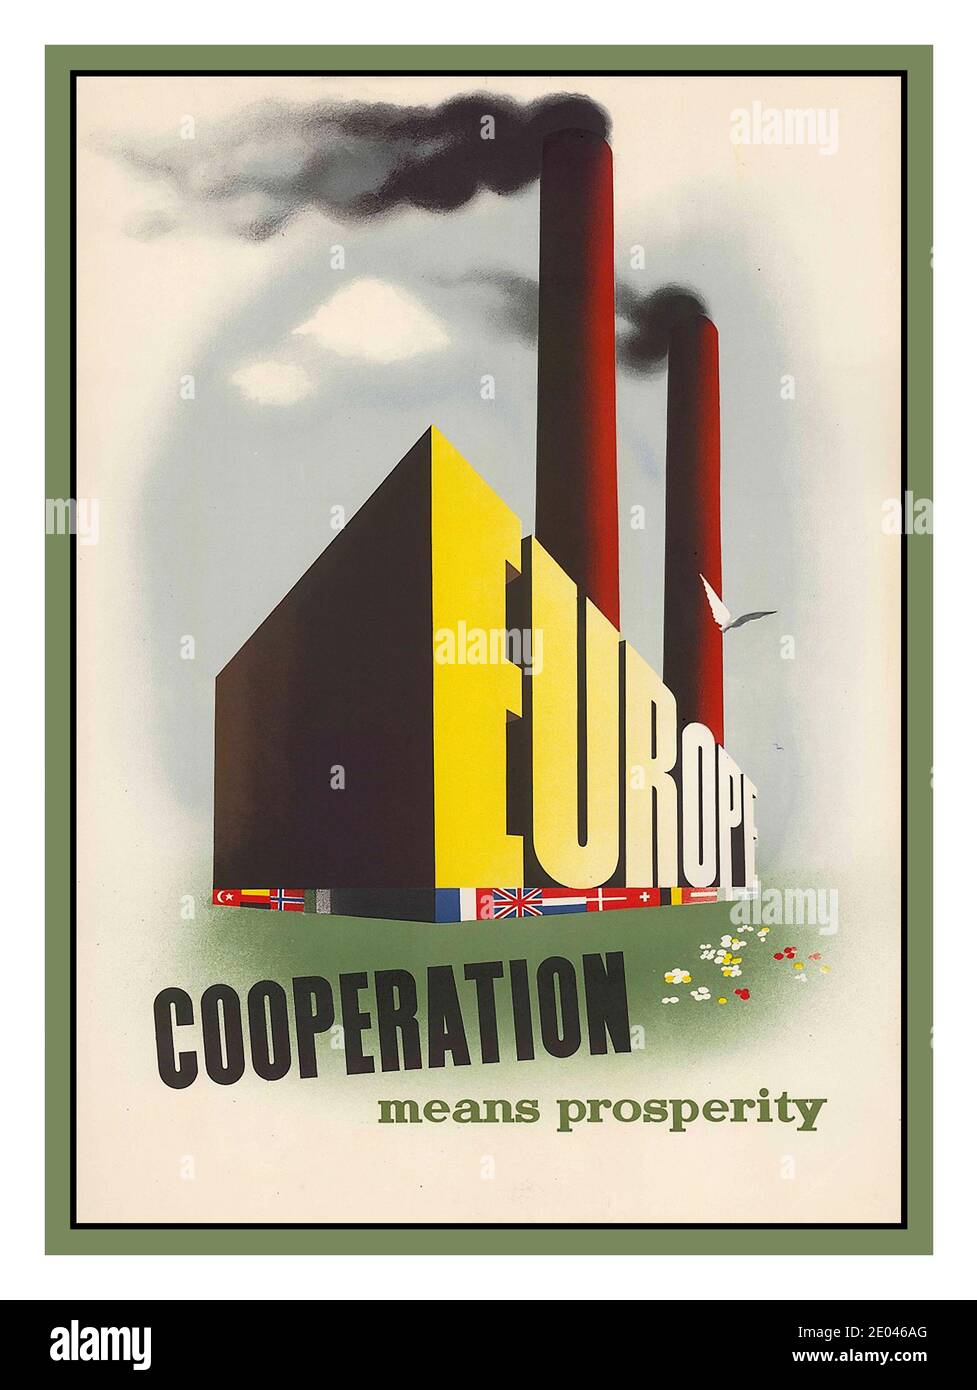 EUROPE CO-OPERATION Post WW2 1946 Recovery Program Propaganda Poster “Europe, cooperation means prosperity” Poster shows an industrial plant fashioned from the letters 'Europe' with European flags around the base and two large smokestacks. Promotes the European Recovery Program (Marshall Plan post WW2 Emmerick, Louis, 1915-1993, artist Stock Photo